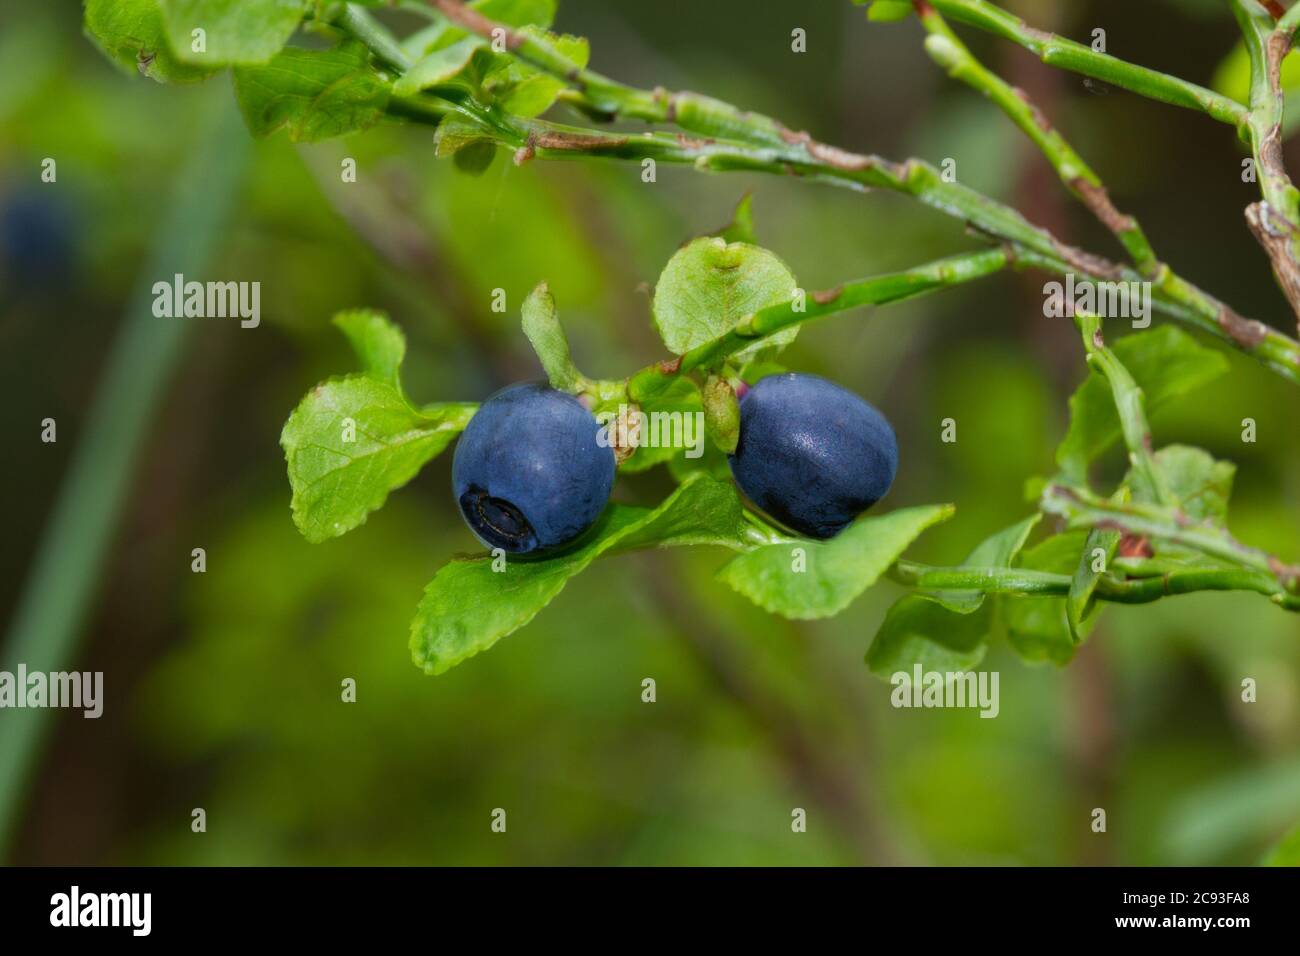 Close-up of two blue berries, the fruit of Bilberry Stock Photo